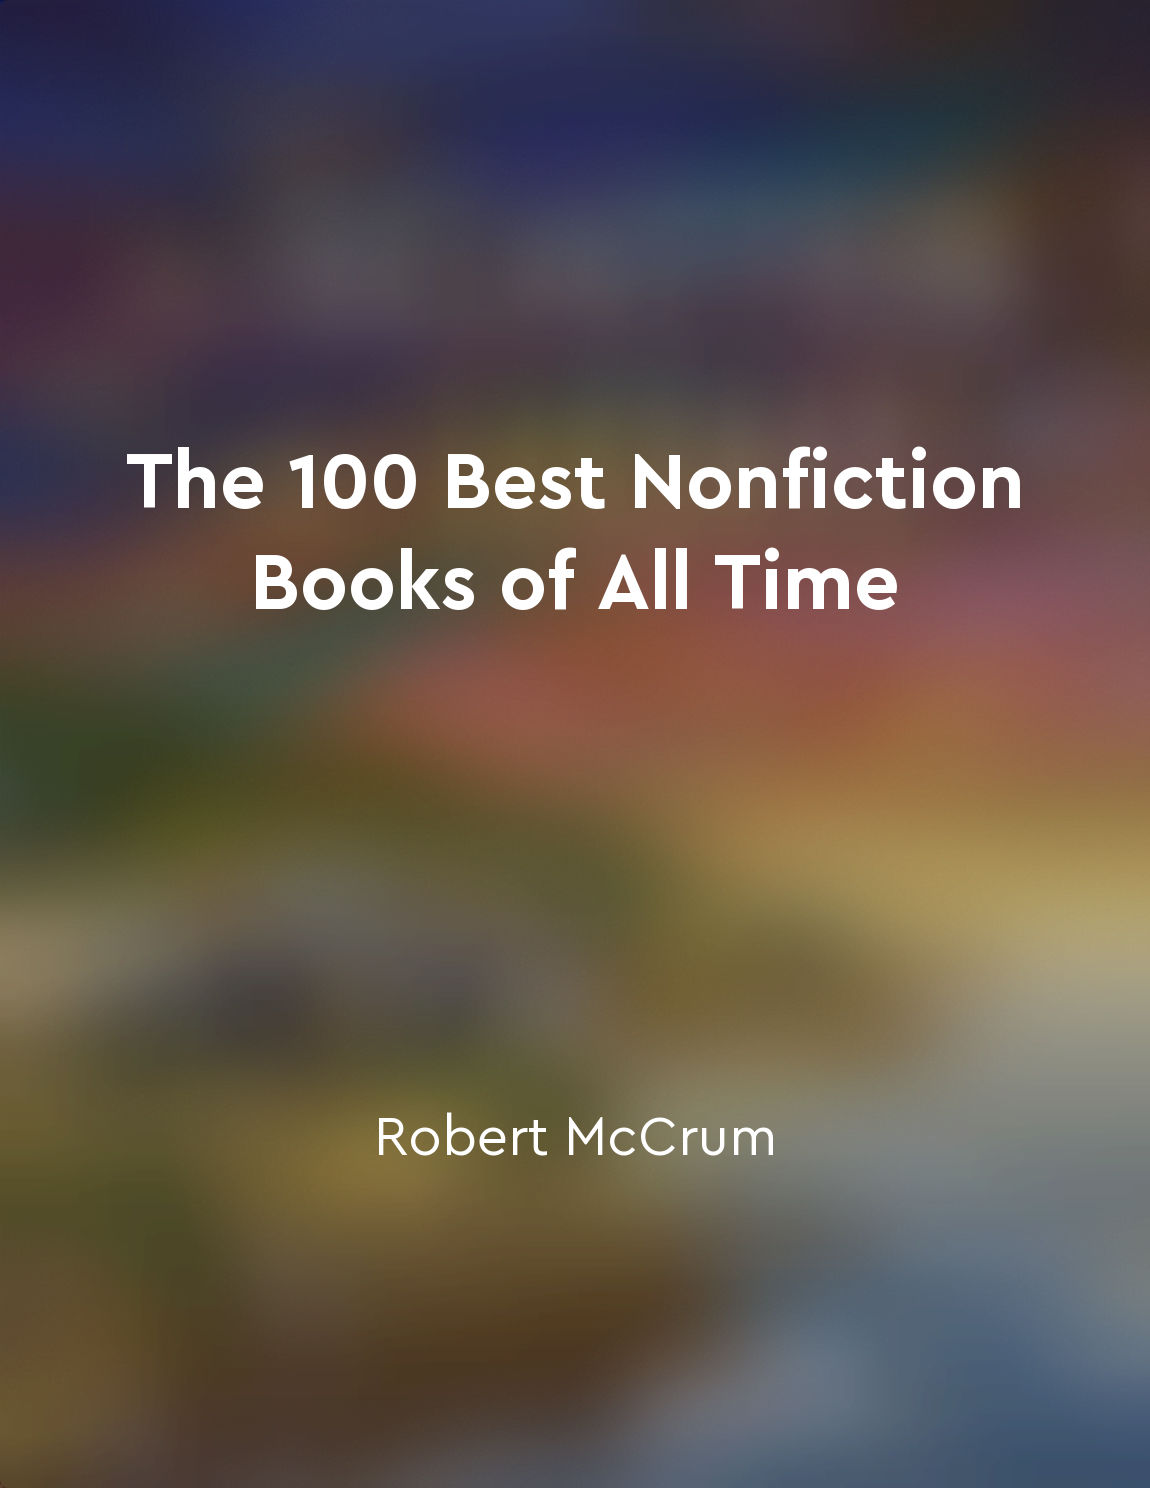 100 Best Nonfiction Books of All Time